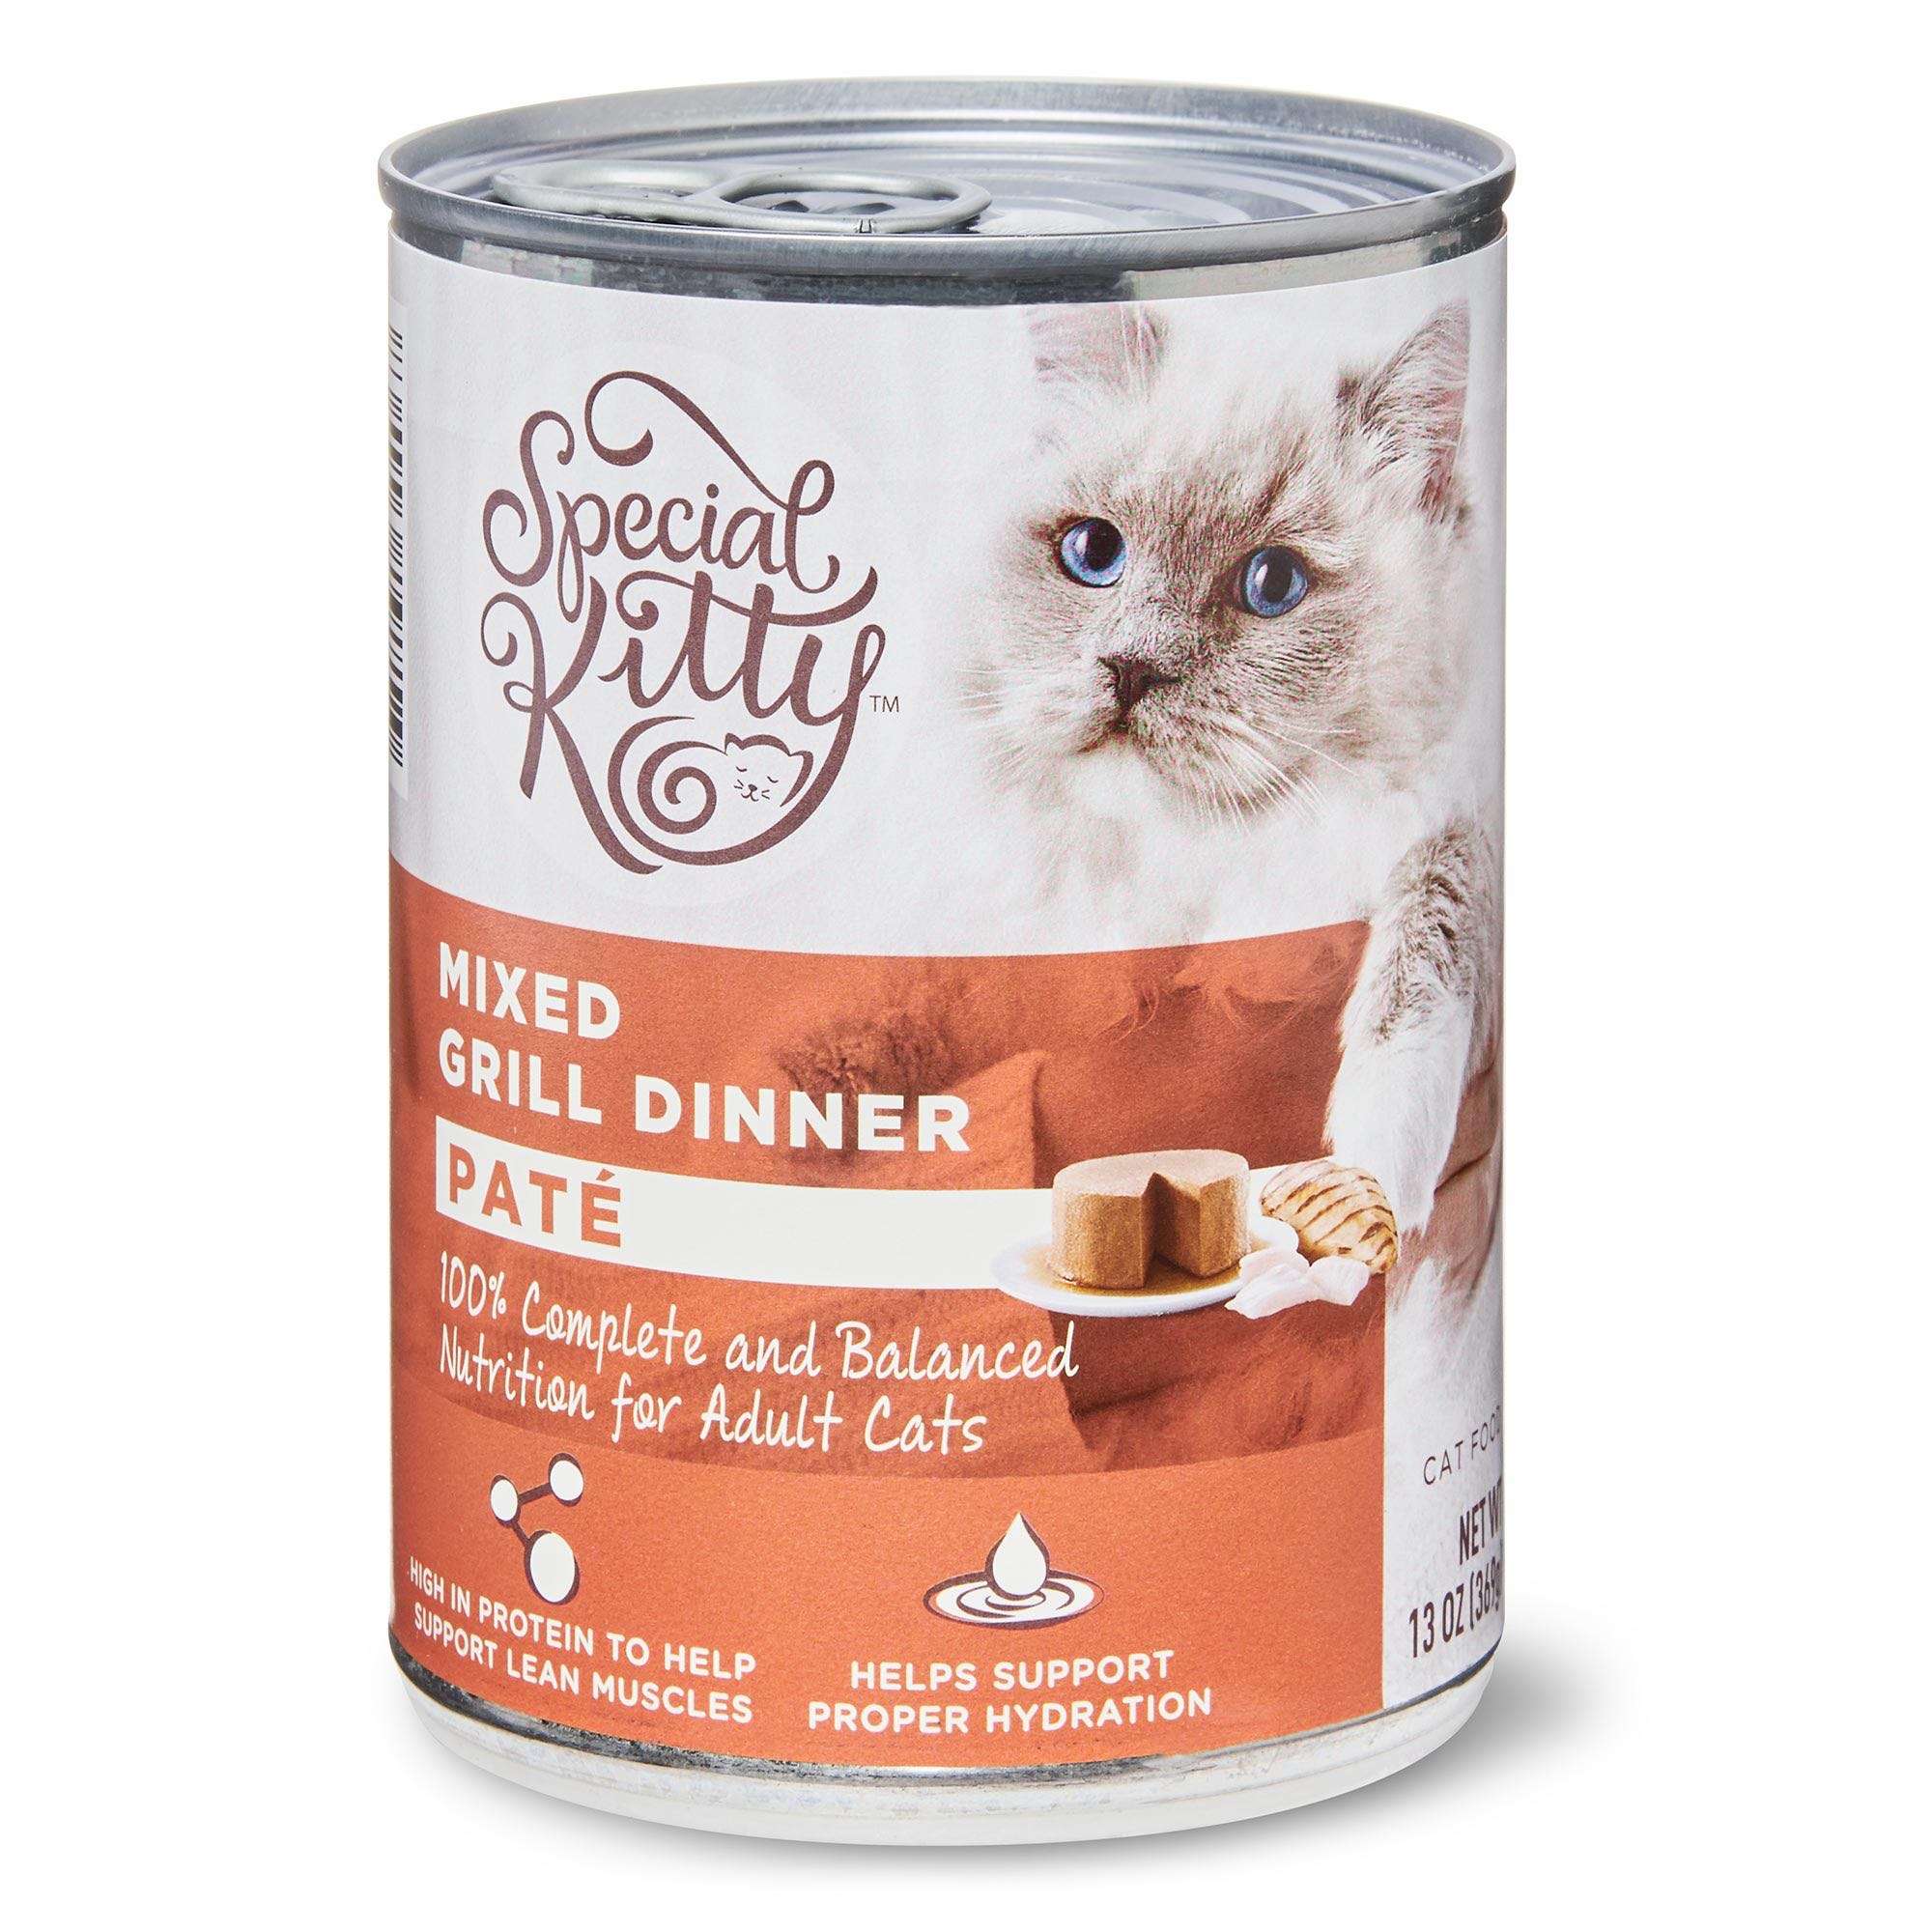 Special Kitty Mixed Grill Dinner Pate Wet Cat Food, 13 oz ...